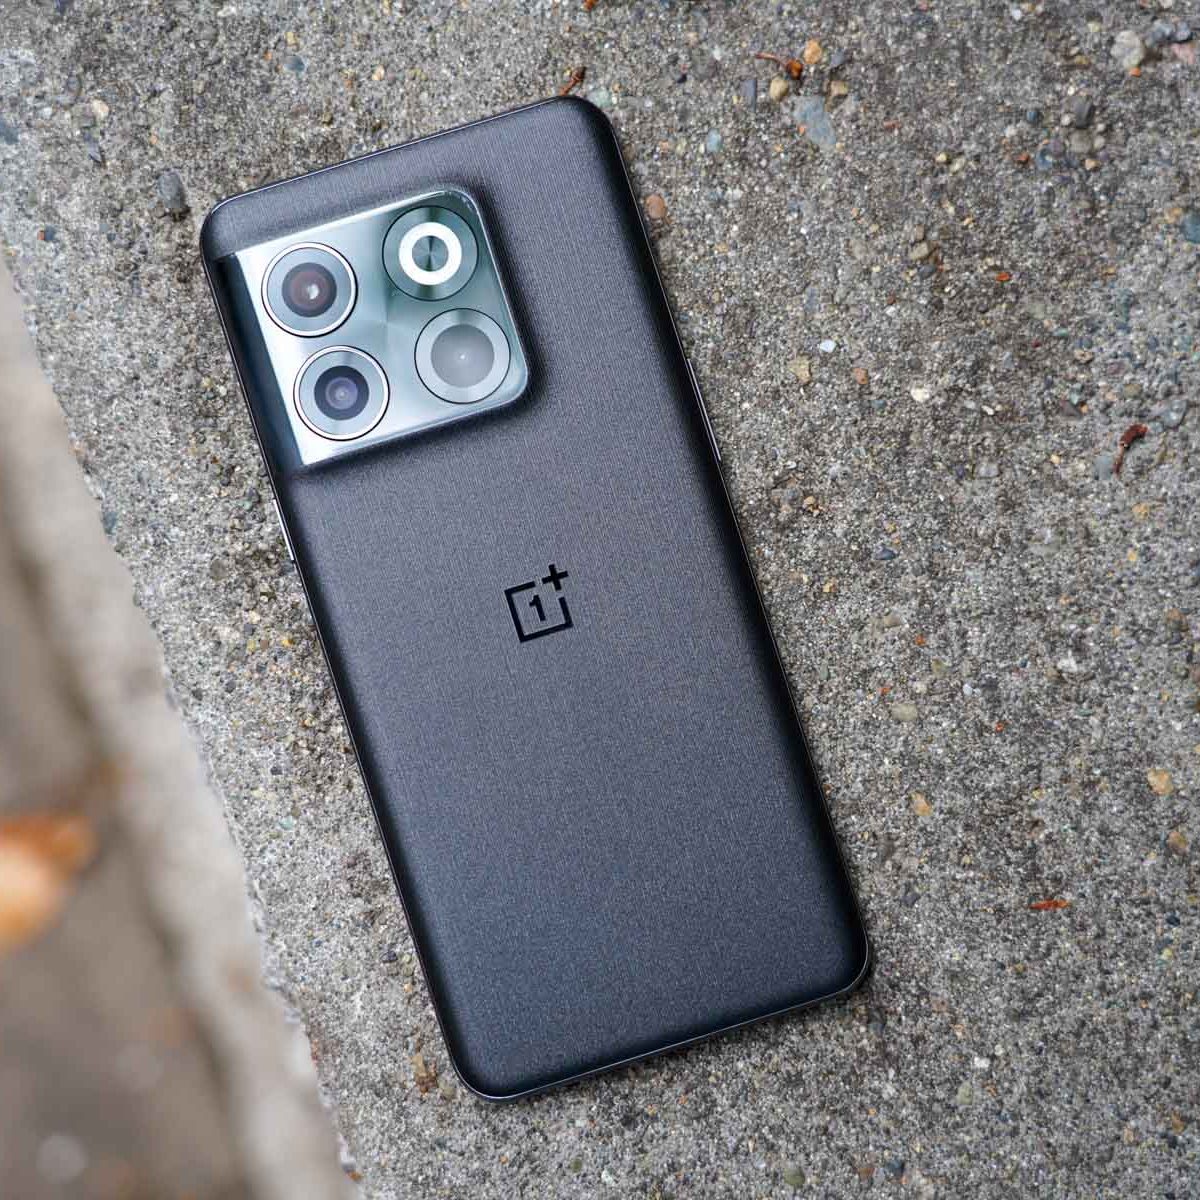 OnePlus 10T Review